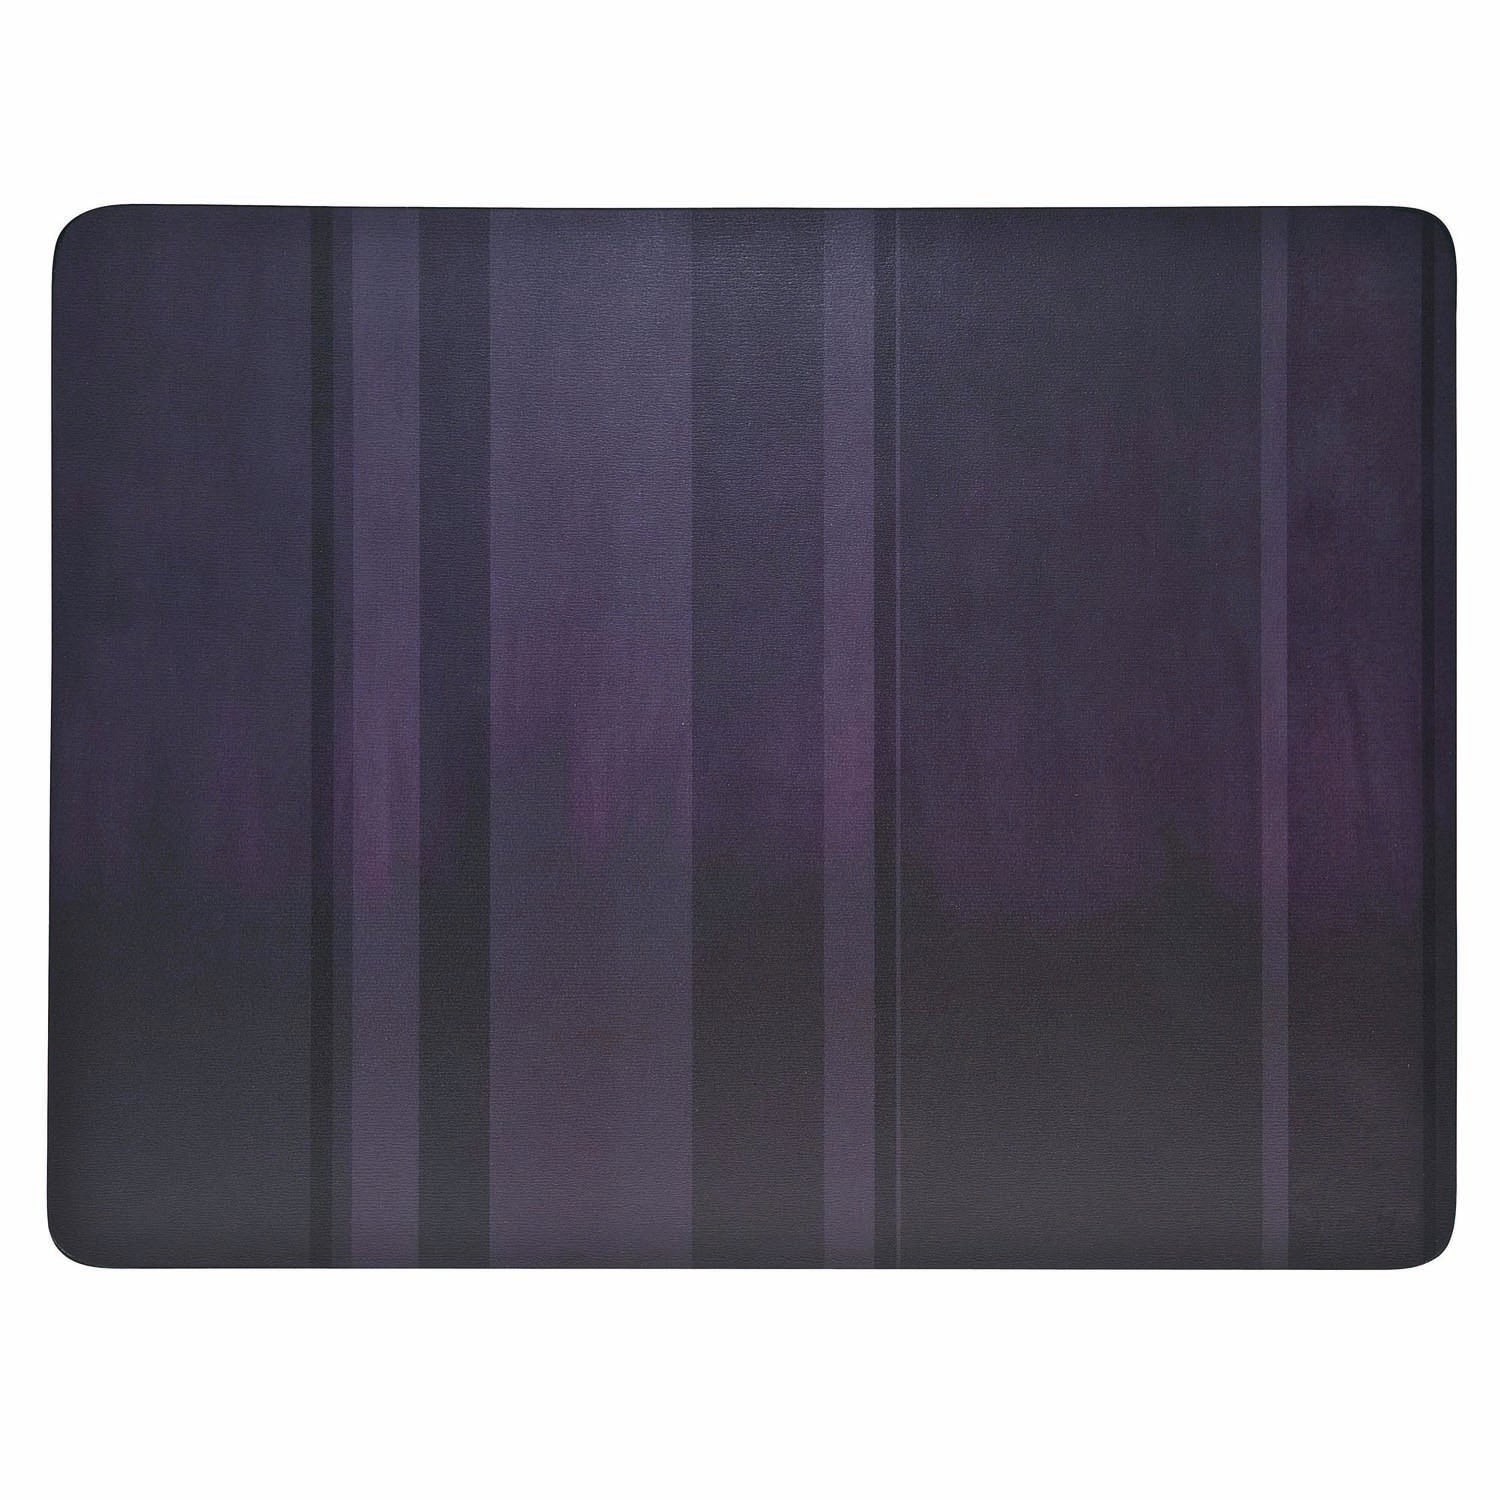 Denby Placemats - Purple - Set of 6 1 Shaws Department Stores